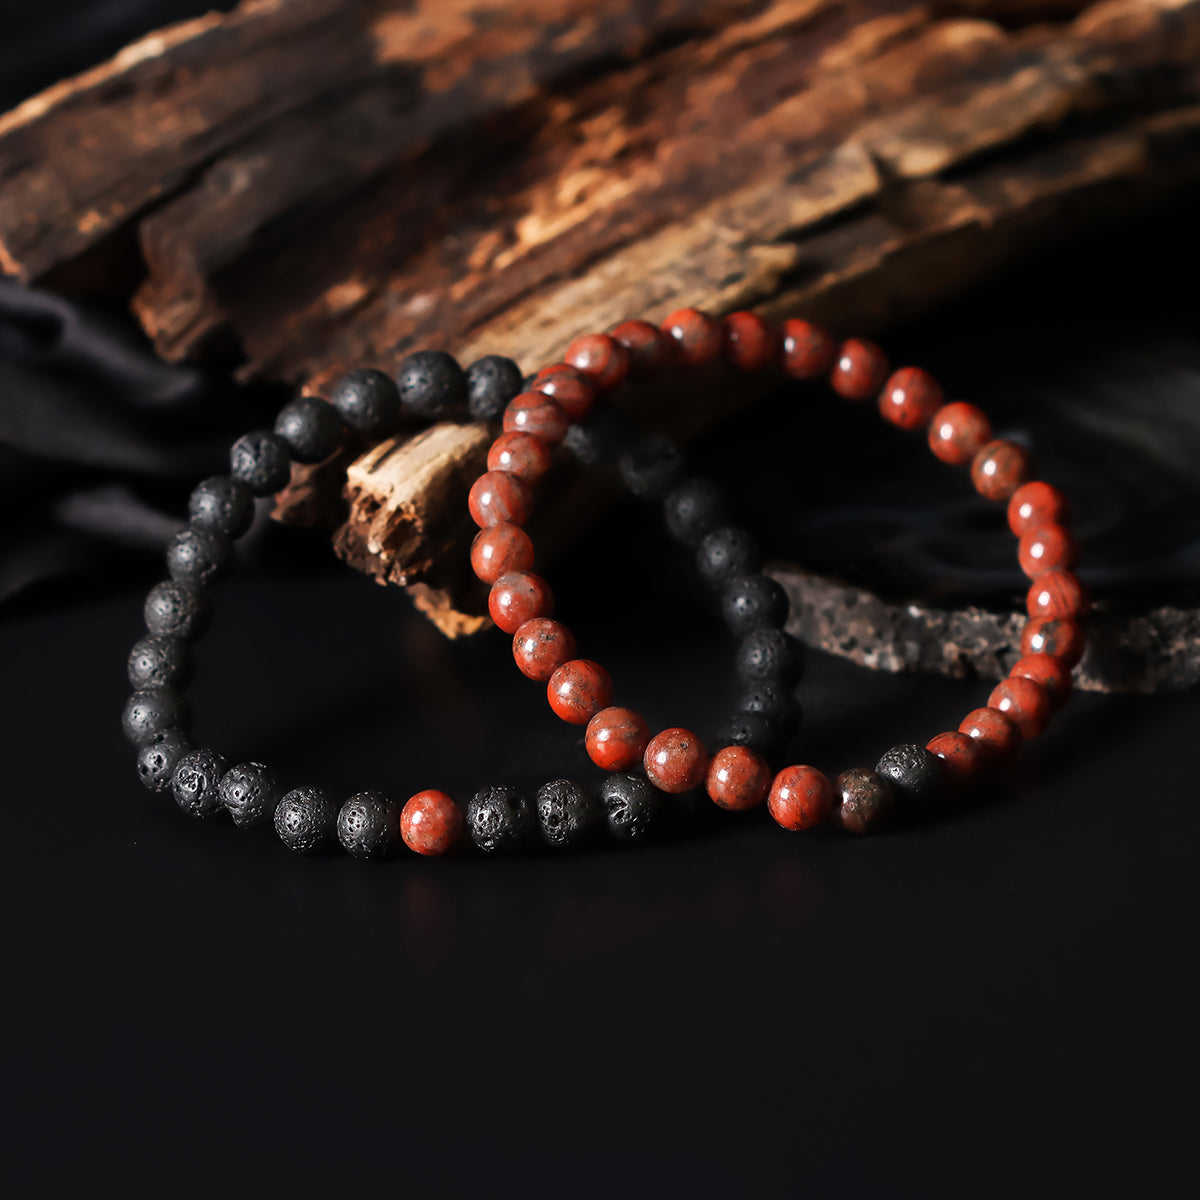 Artistic close-up of the Natural Red Jasper & Lava Gemstone Bracelet. A captivating shot capturing the rich red hues of Jasper and the raw elegance of lava gemstones, creating a unique and eye-catching composition.